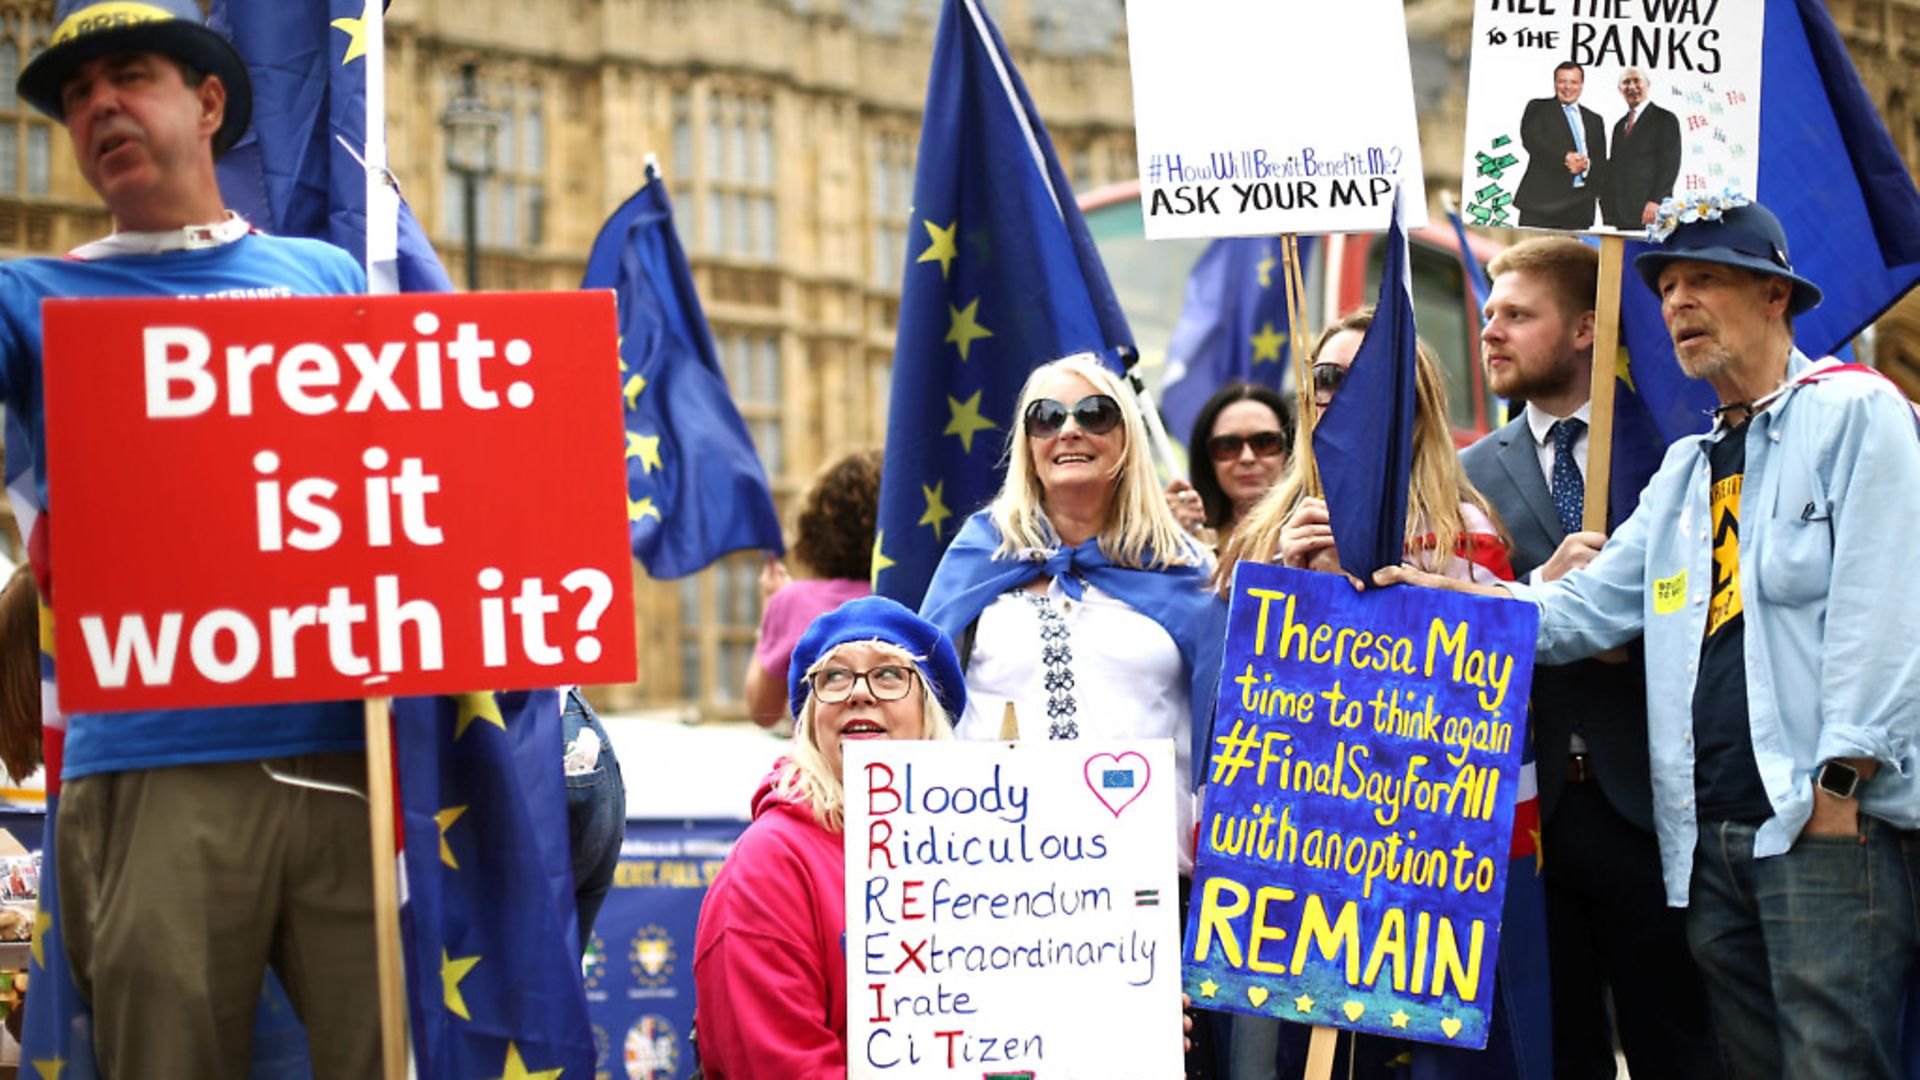 Anti-Brexit demonstrators campaign opposite the Houses of Parliament in London. Photograph: Yui Mok/PA Wire. - Credit: PA